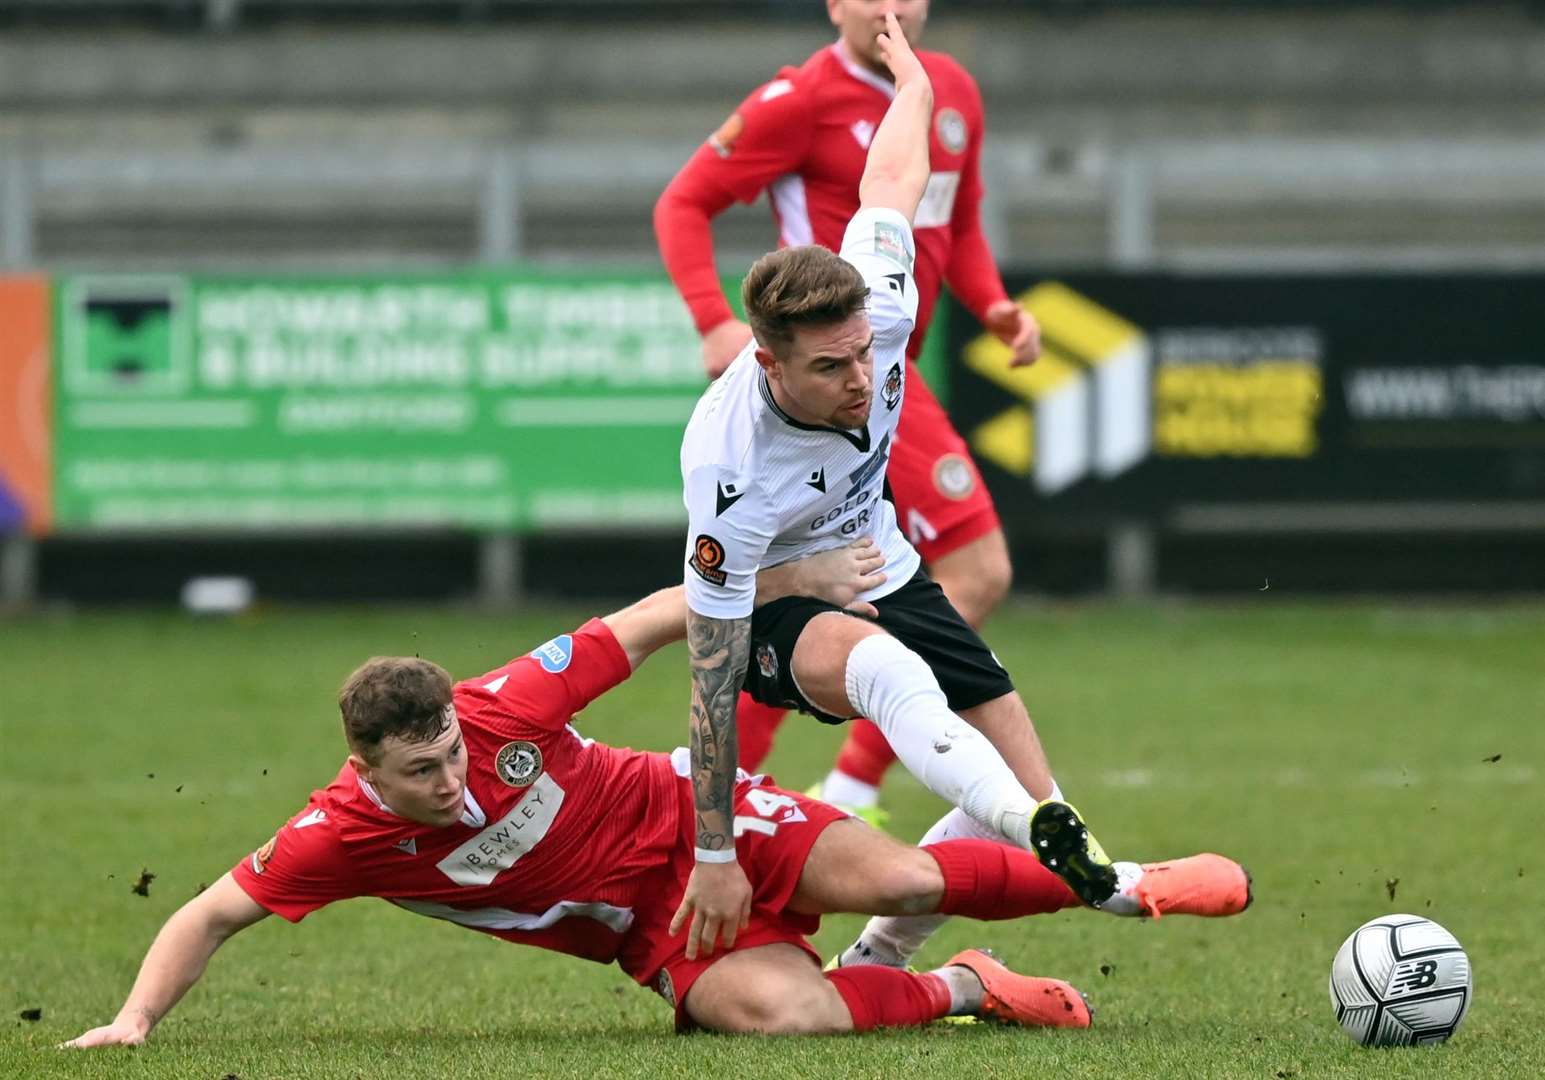 Jack Jebb in action for Dartford, who will start the new season away to St Albans. Picture: Keith Gillard